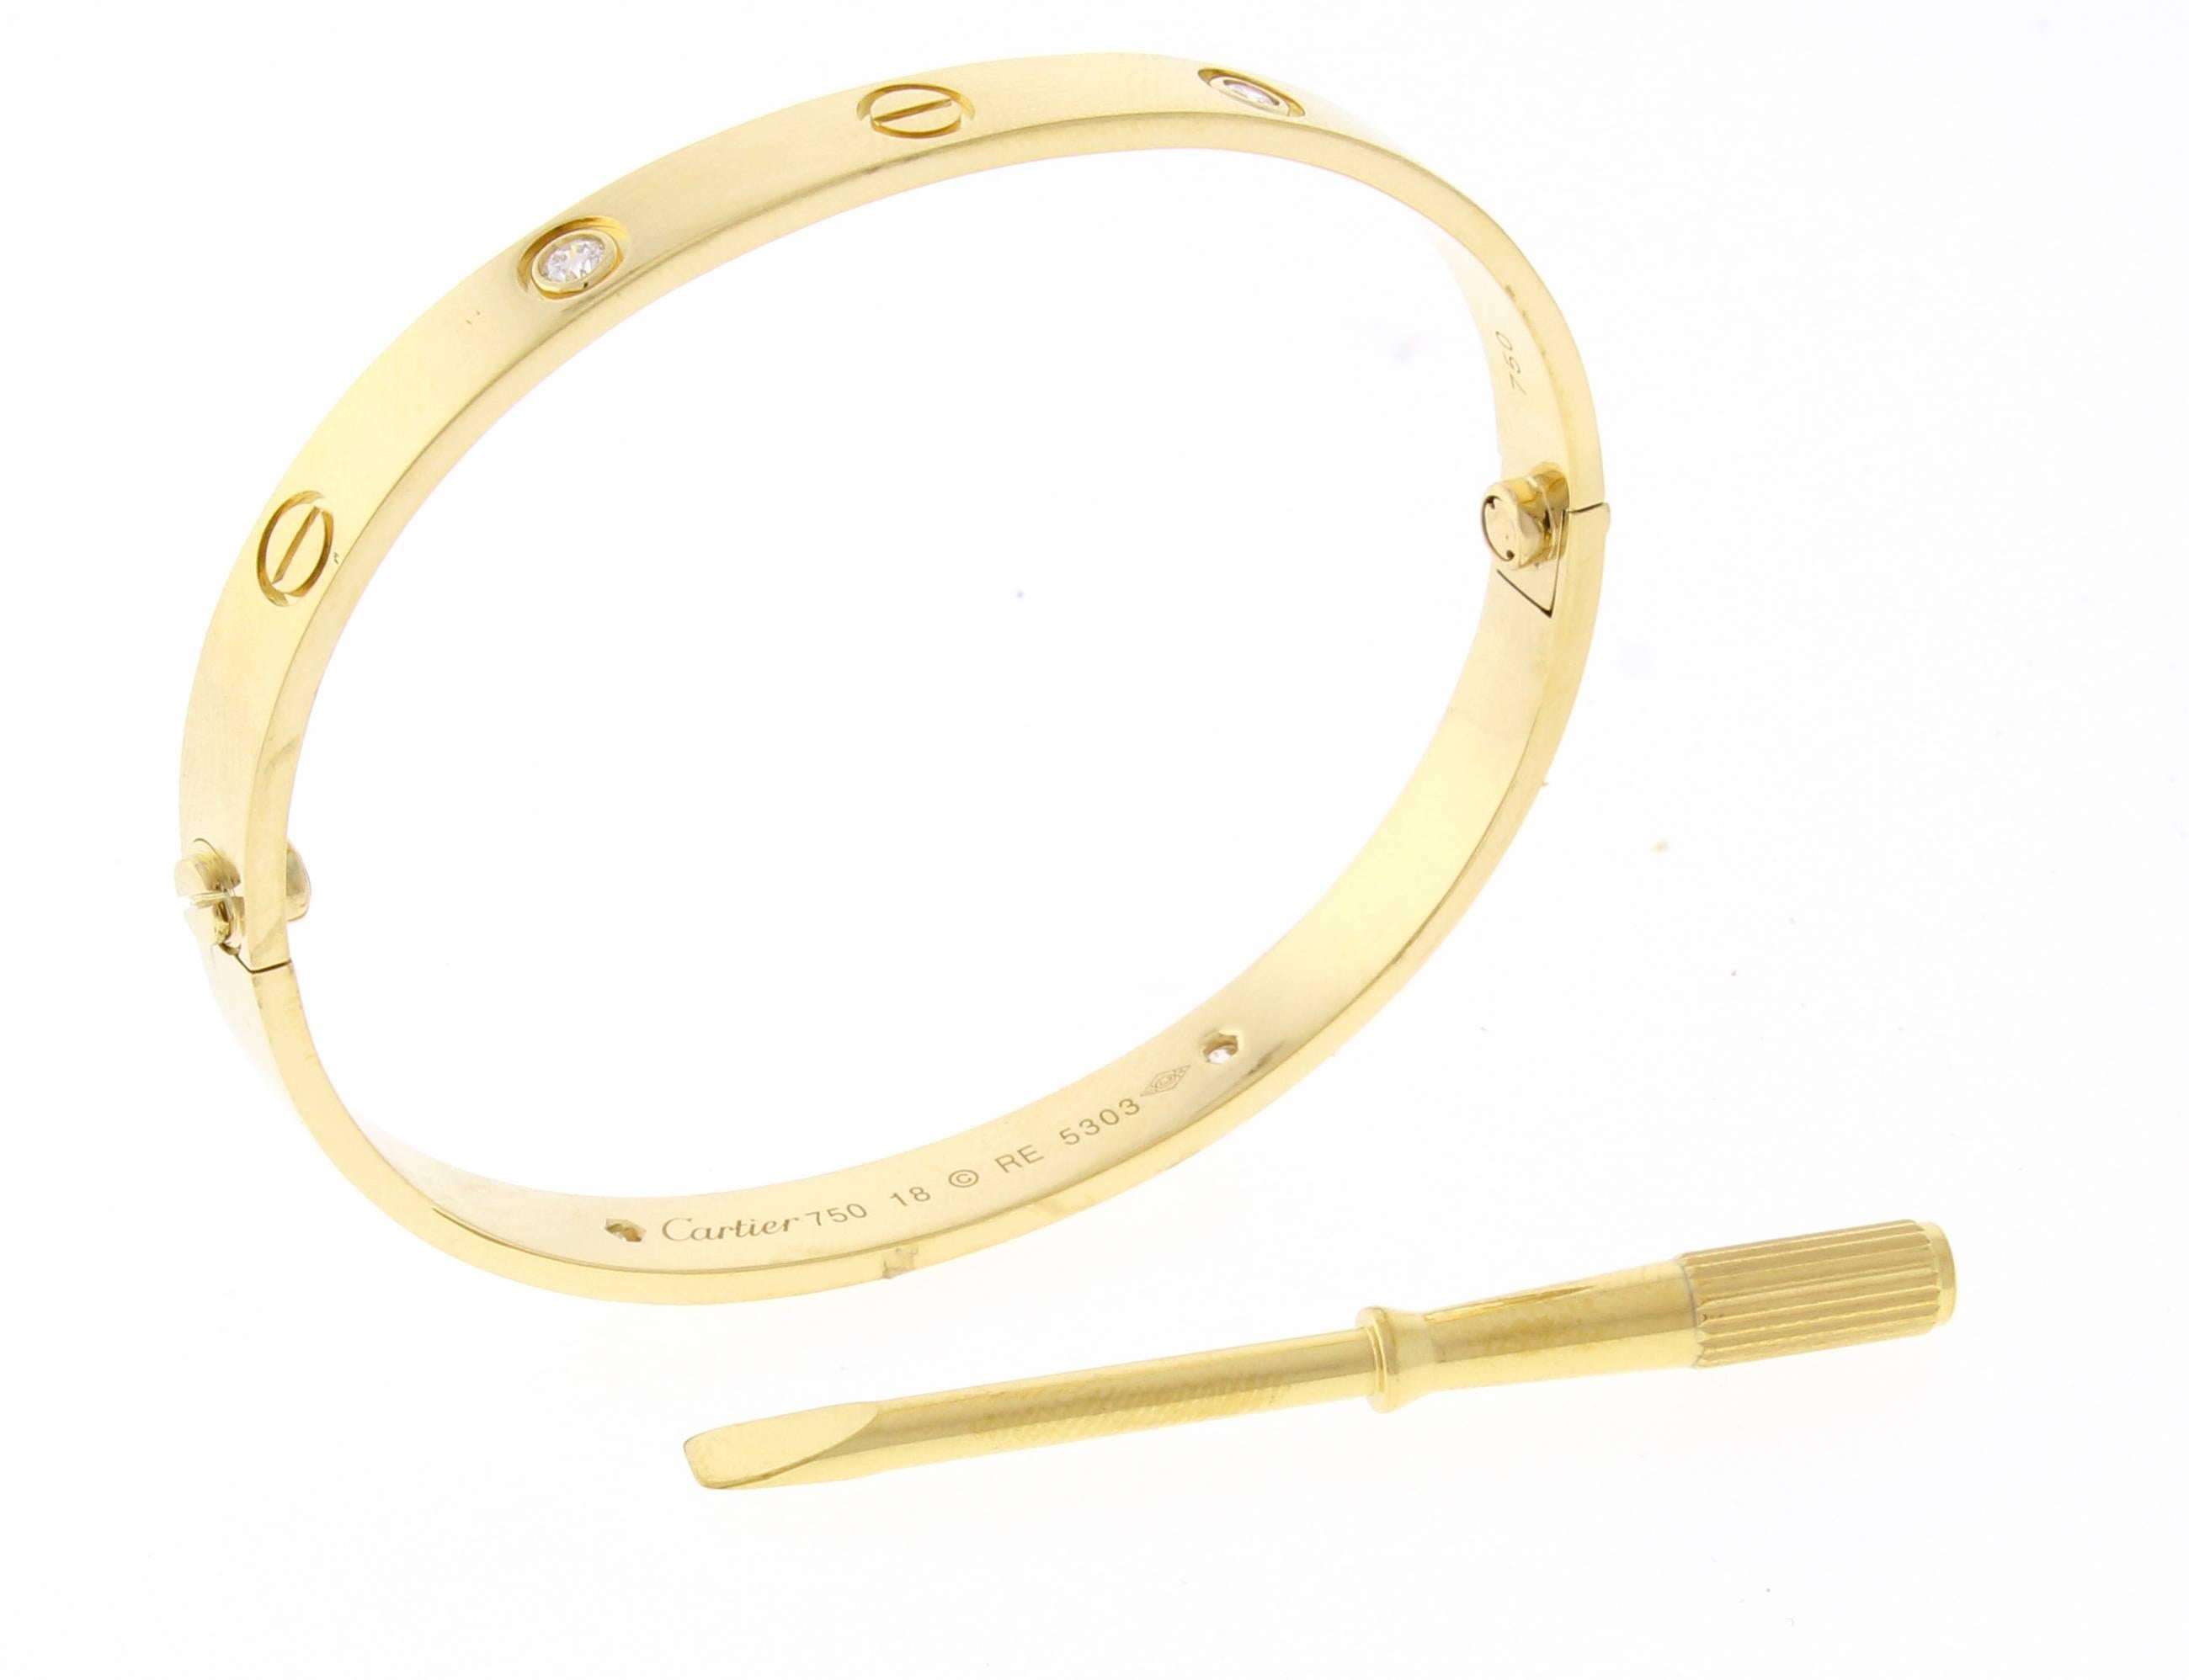 18 karat yellow gold Cartier Love bracelet. The love bracelet remains an iconic symbol of love that transcends convention. Studded with four brilliant-cut diamonds totaling 0.42   Size 18, Includes replacement screwdriver, Cartier box. Repolished.  